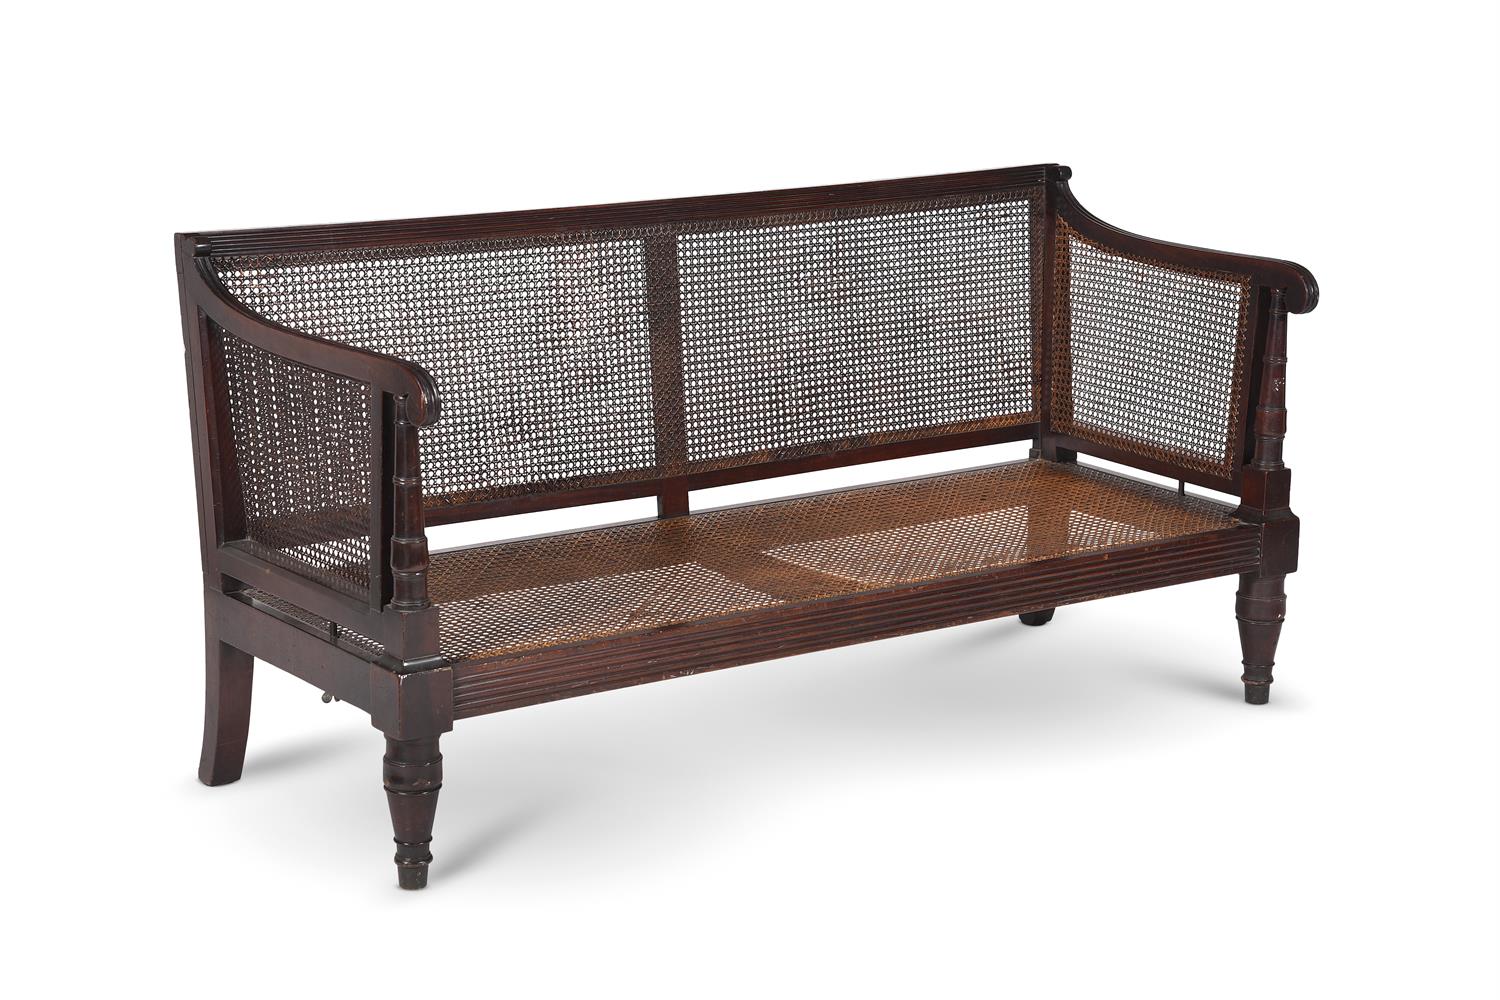 A REGENCY MAHOGANY AND CANED BERGÈRE SETTEE, IN THE MANNER OF WILLIAM TROTTER, CIRCA 1815